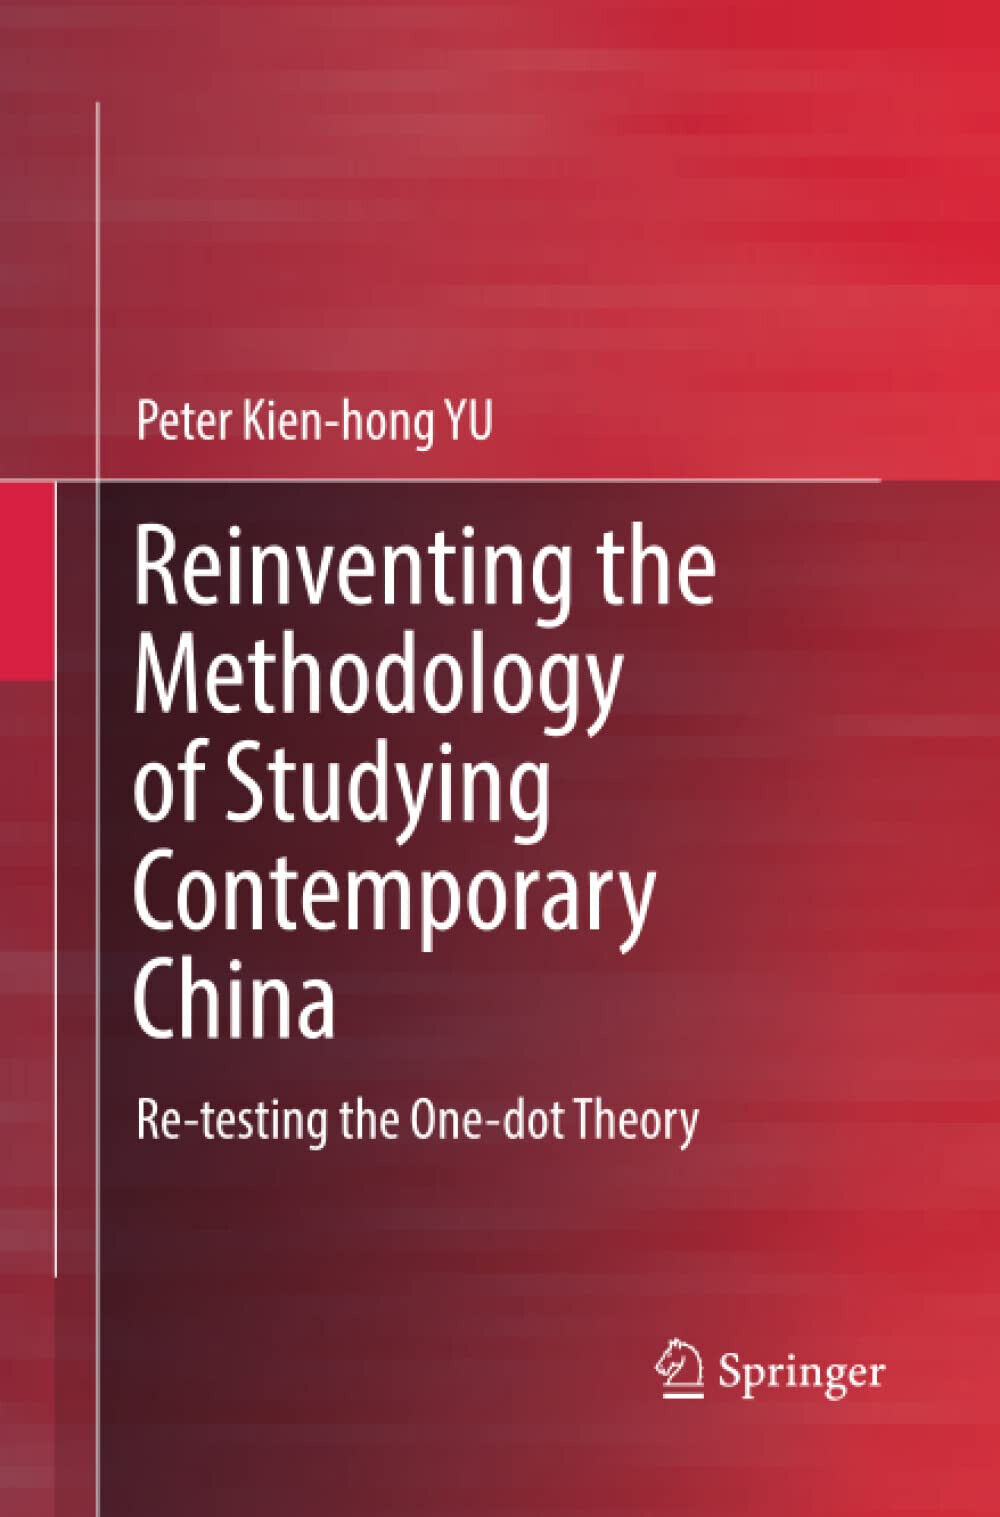 Reinventing the Methodology of Studying Contemporary China - Peter Kien-Hong Yu libro usato